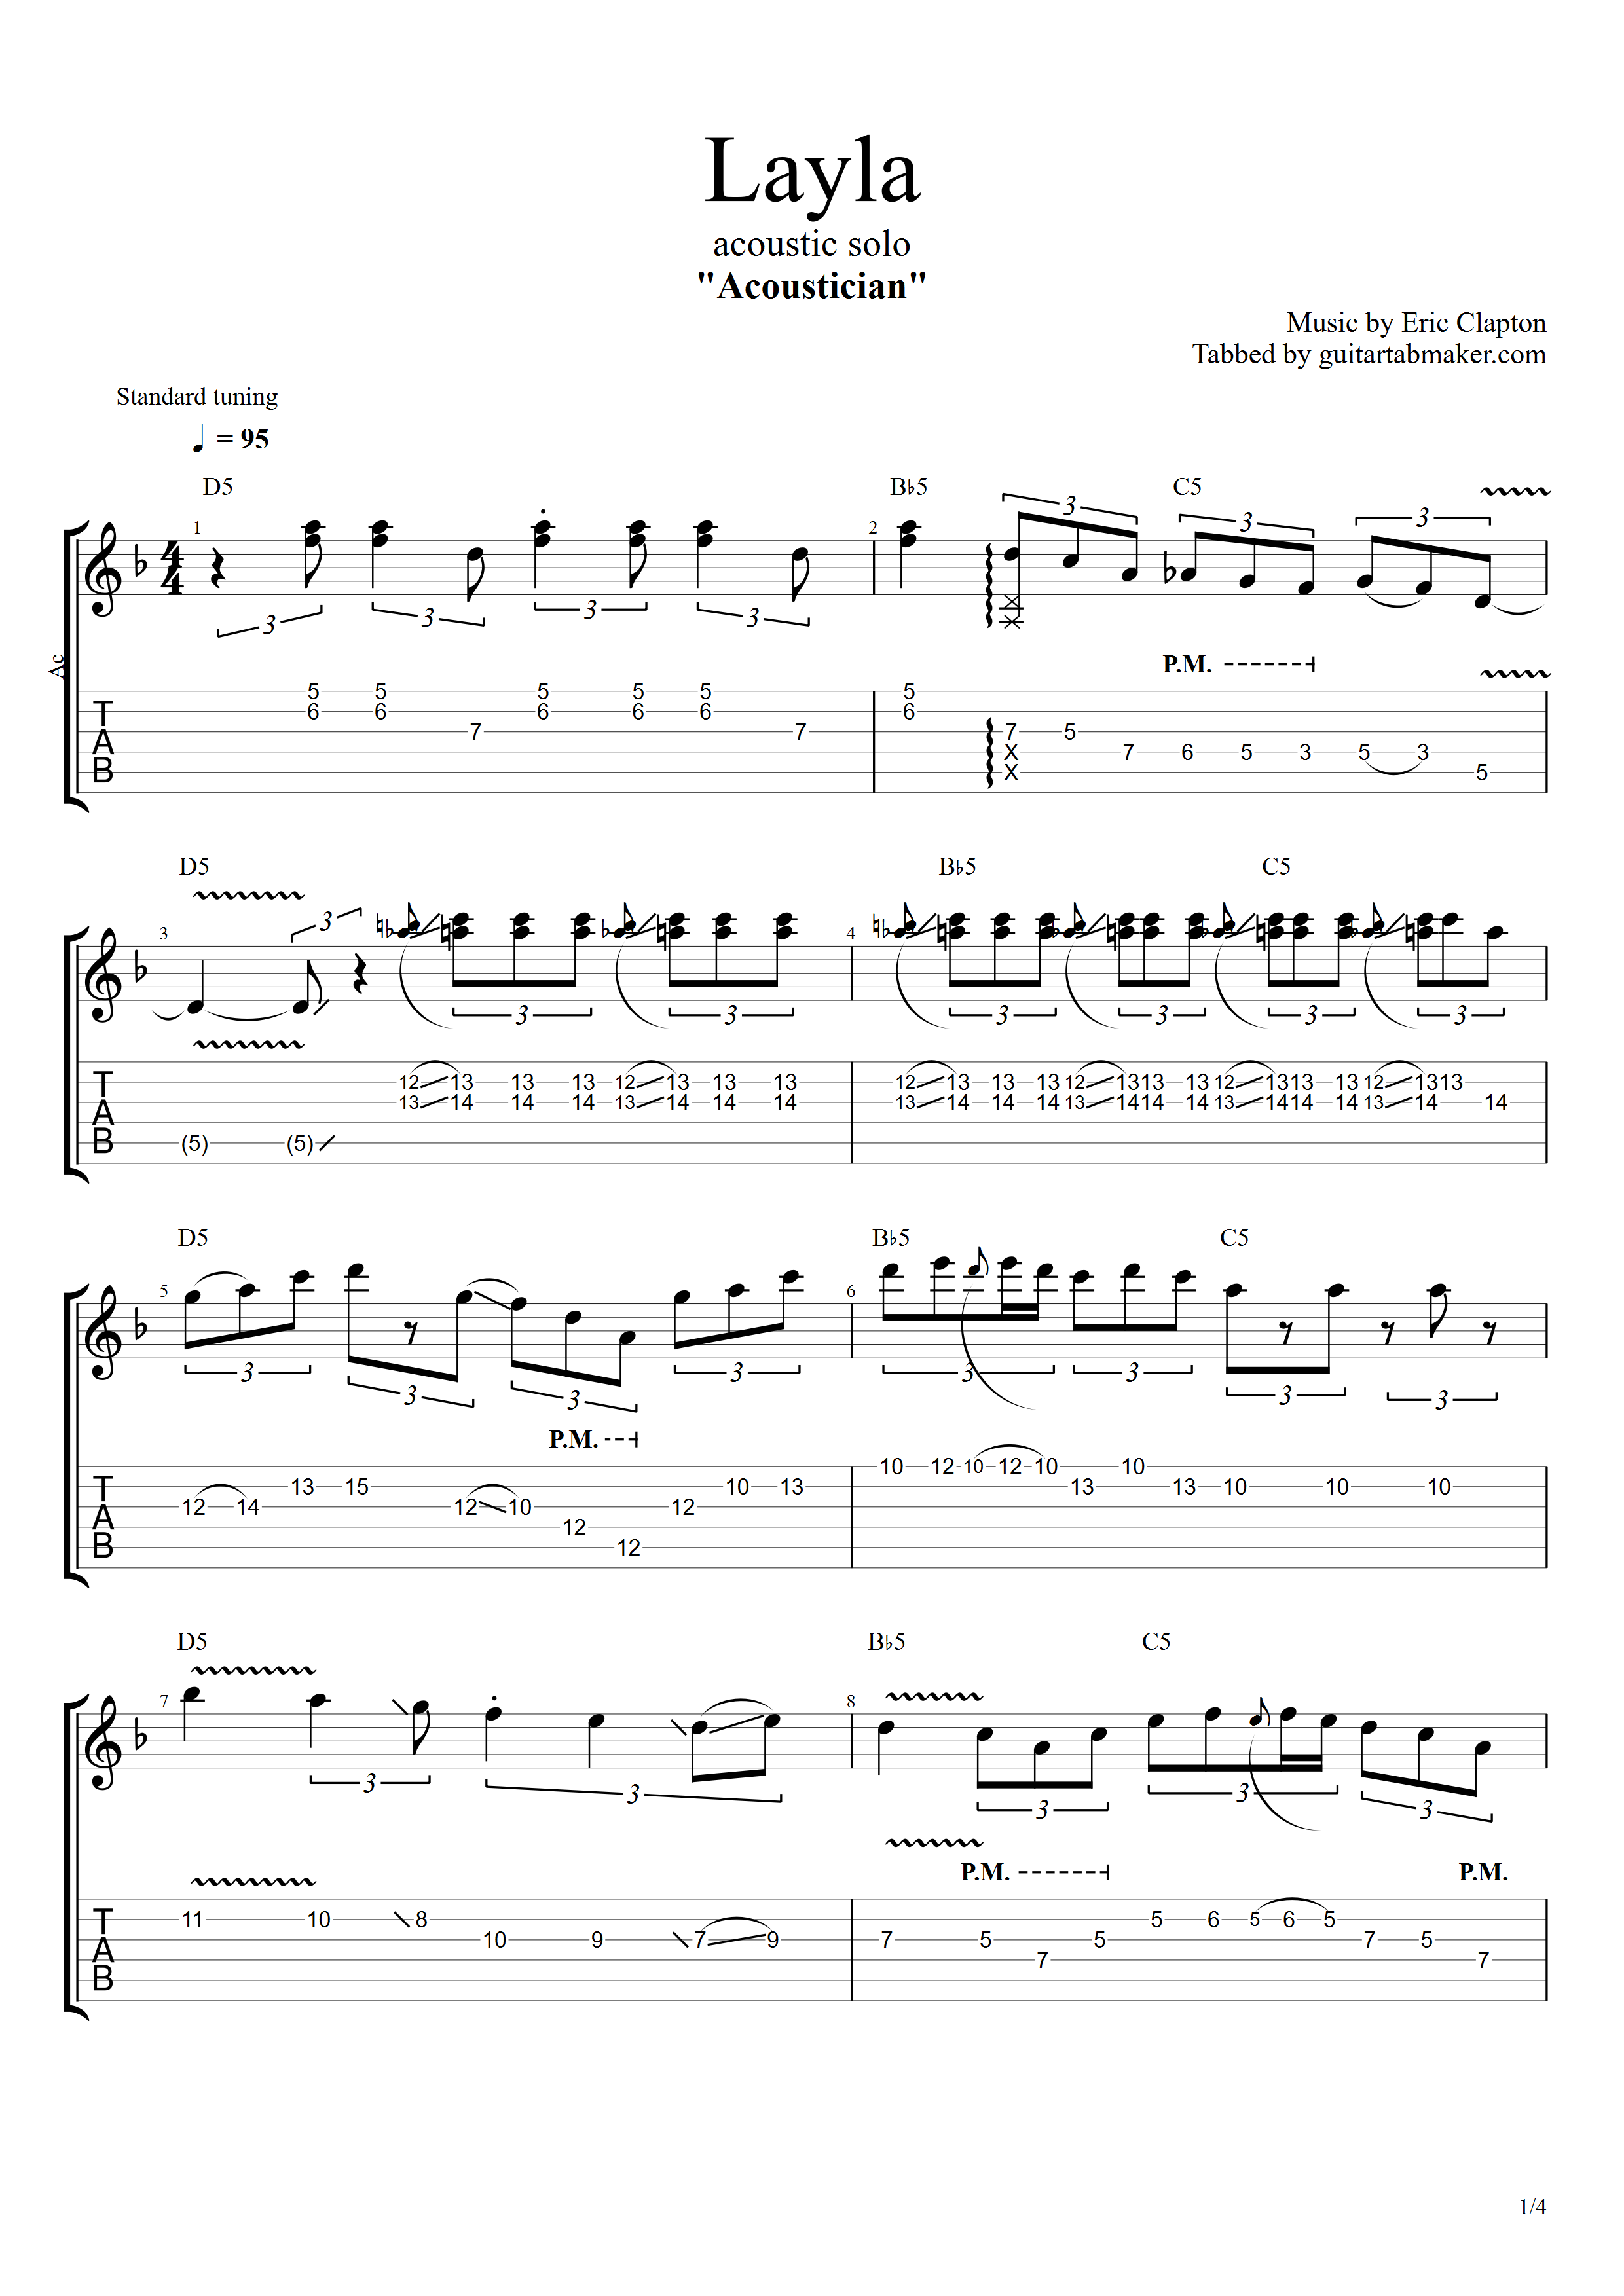 Layla by Eric Clapton - Guitar Lead Sheet - Guitar Instructor